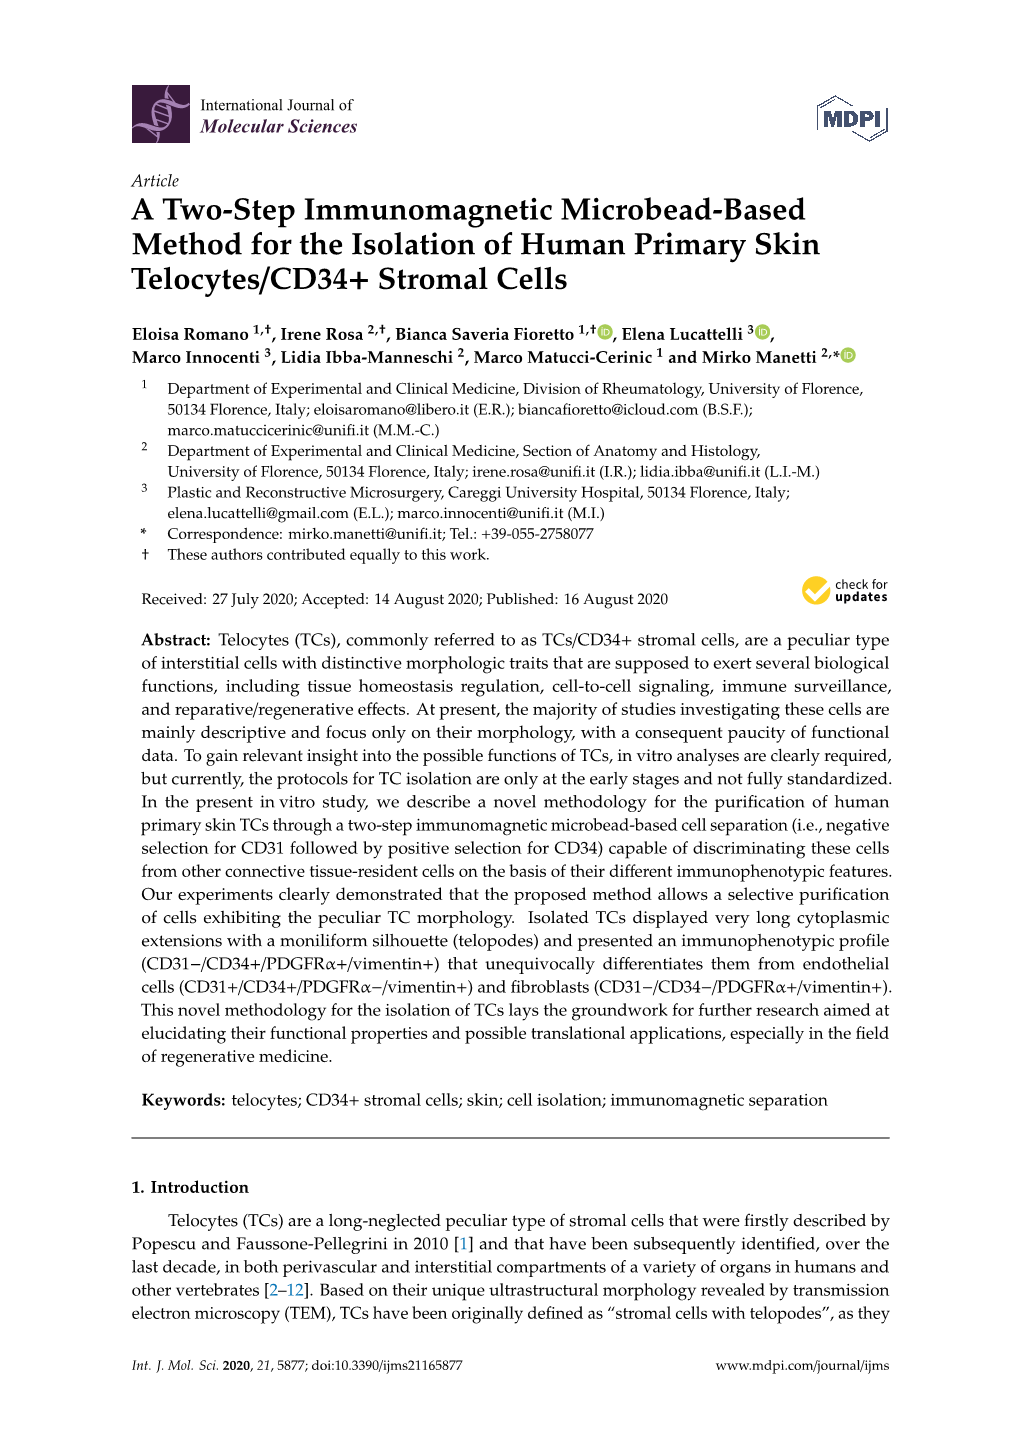 A Two-Step Immunomagnetic Microbead-Based Method for the Isolation of Human Primary Skin Telocytes/CD34+ Stromal Cells